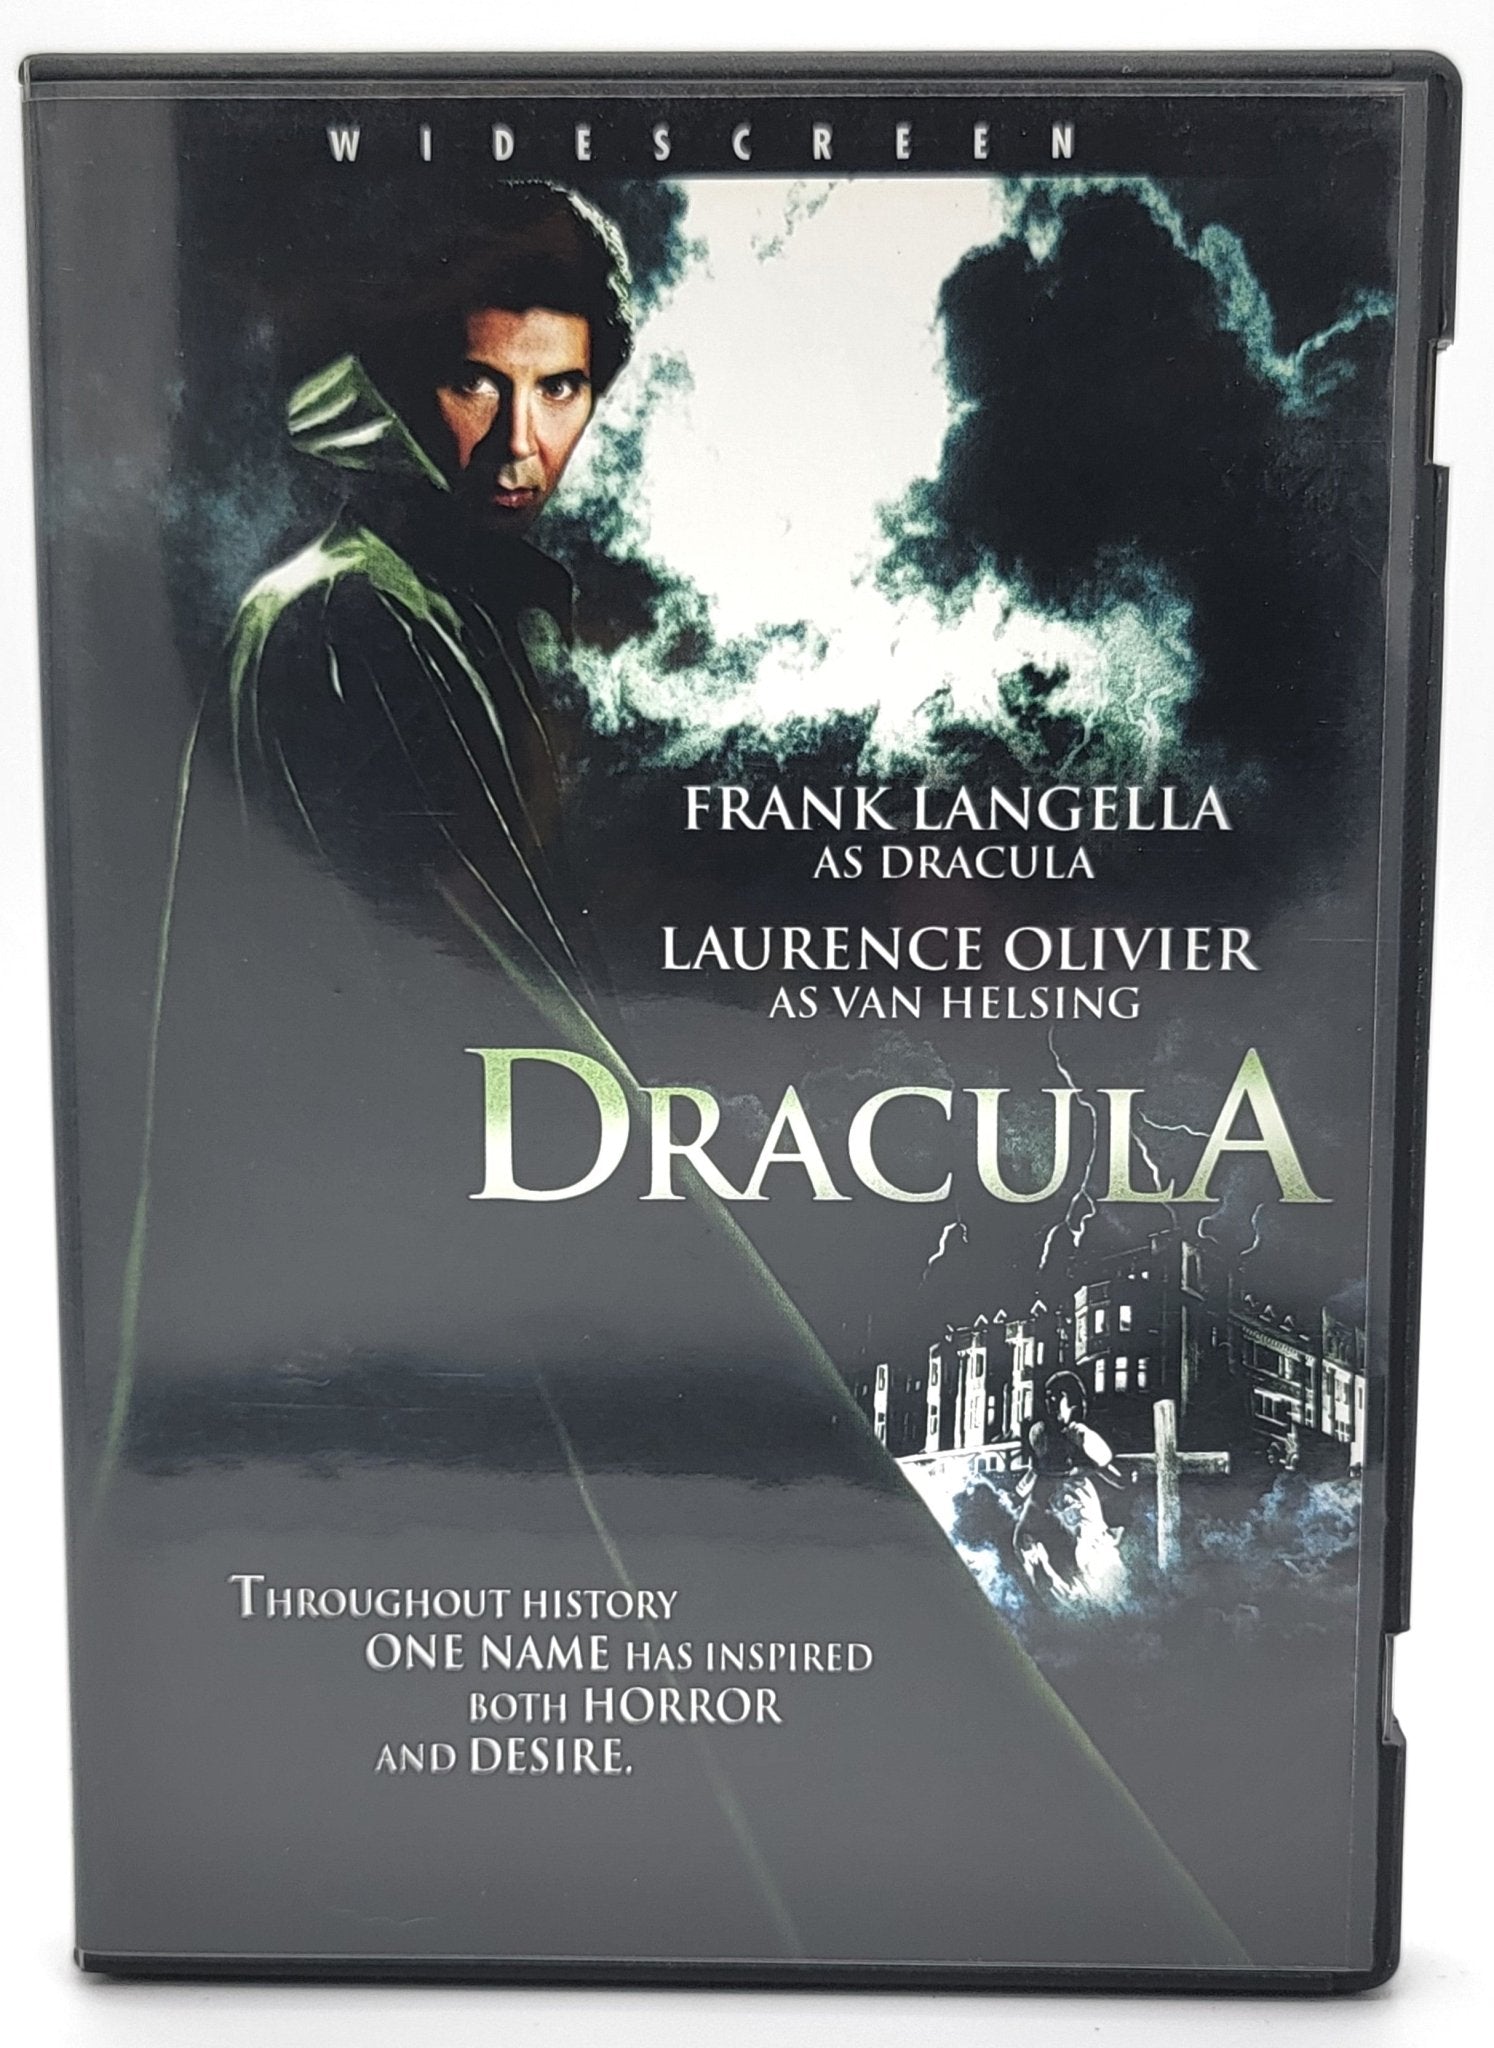 ‎ Universal Pictures Home Entertainment - Dracula | DVD | - DVD - Steady Bunny Shop